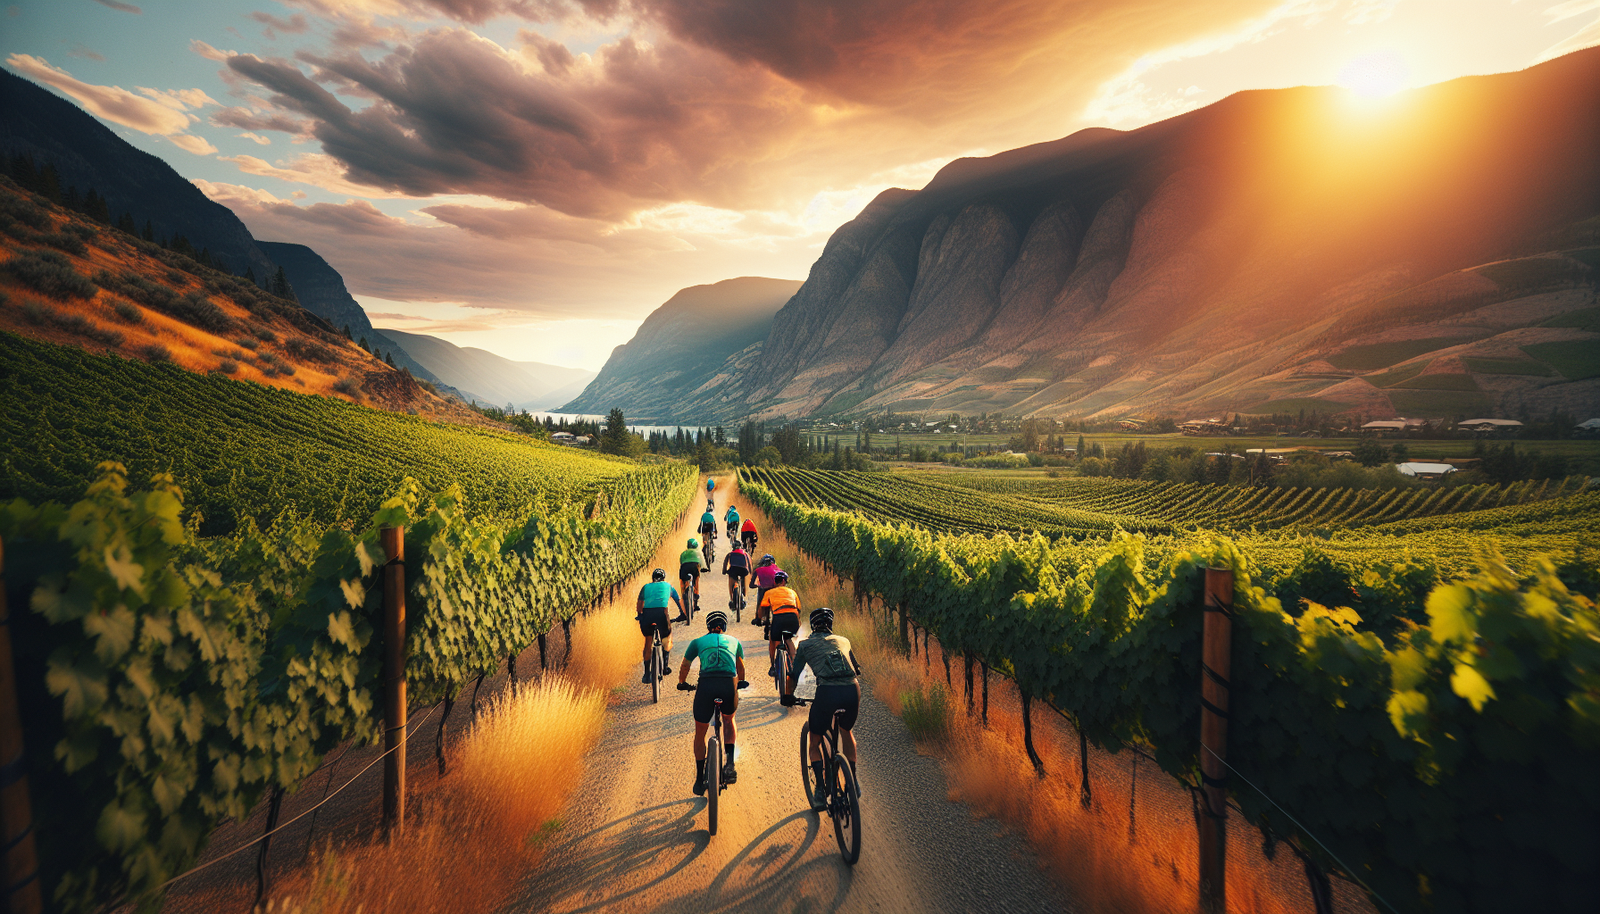 Cyclists riding along a trail with vineyards and mountains in the background